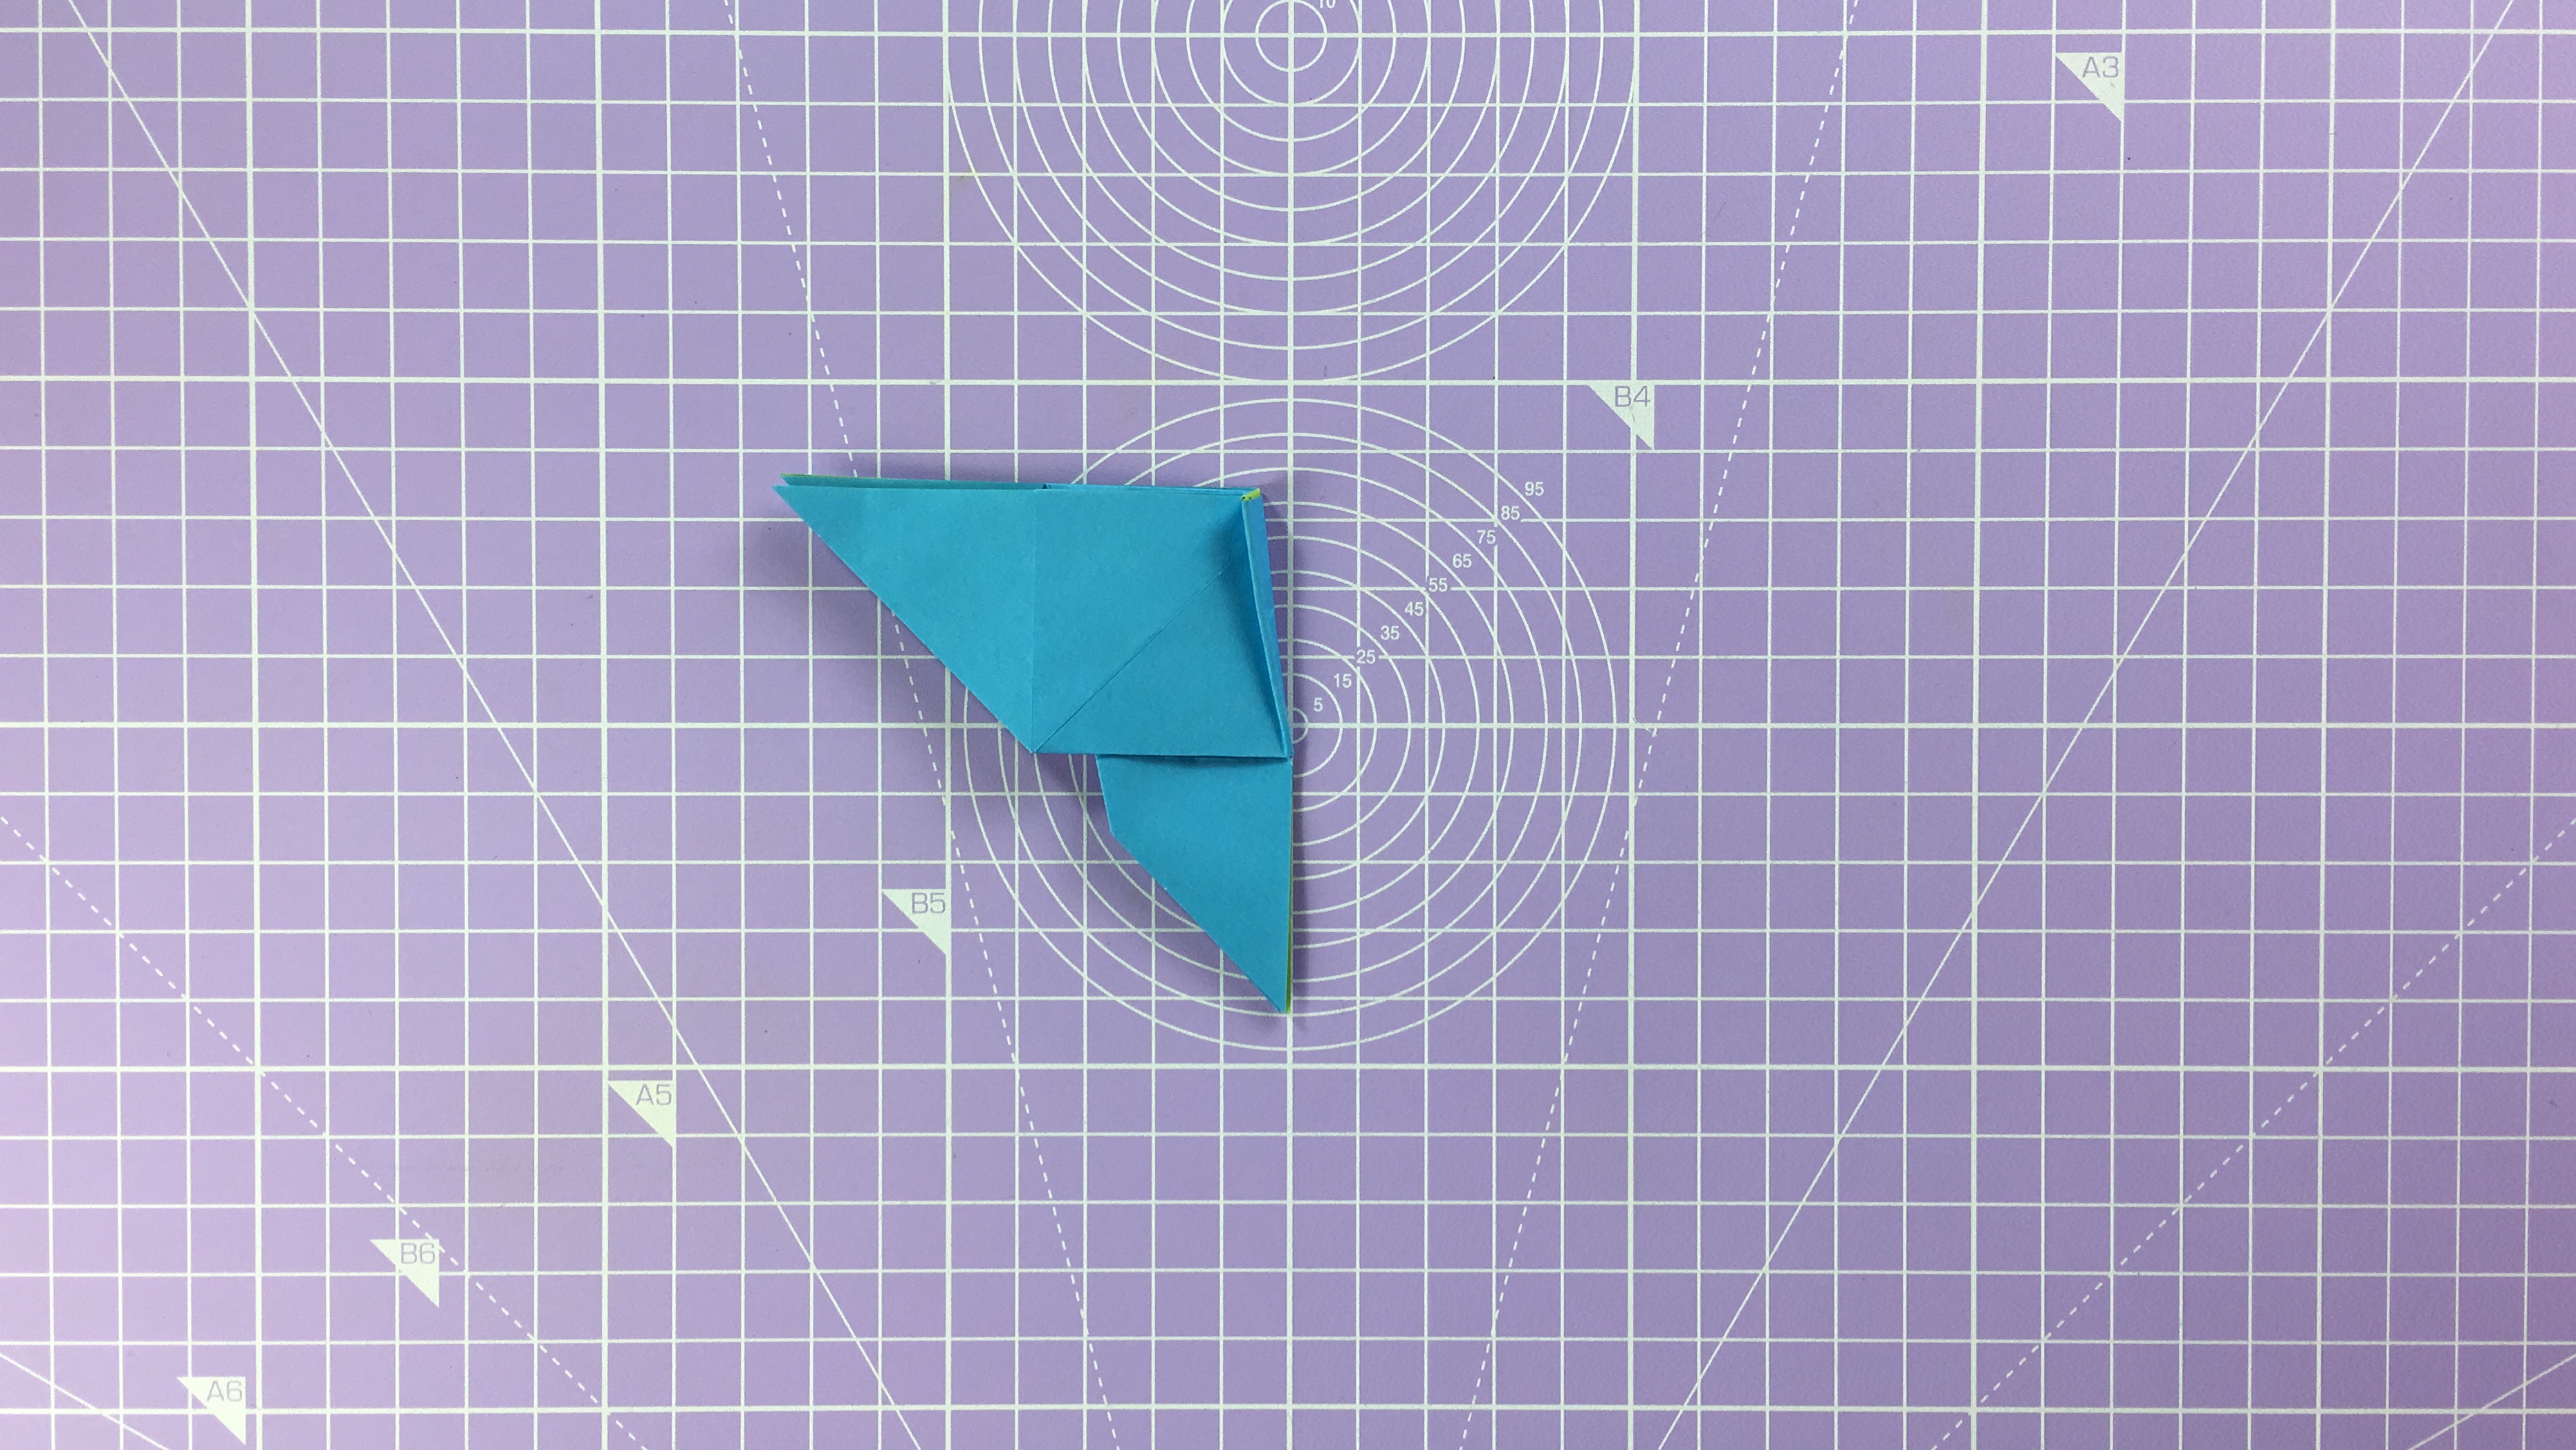 How to make an origami butterfly - step 15a